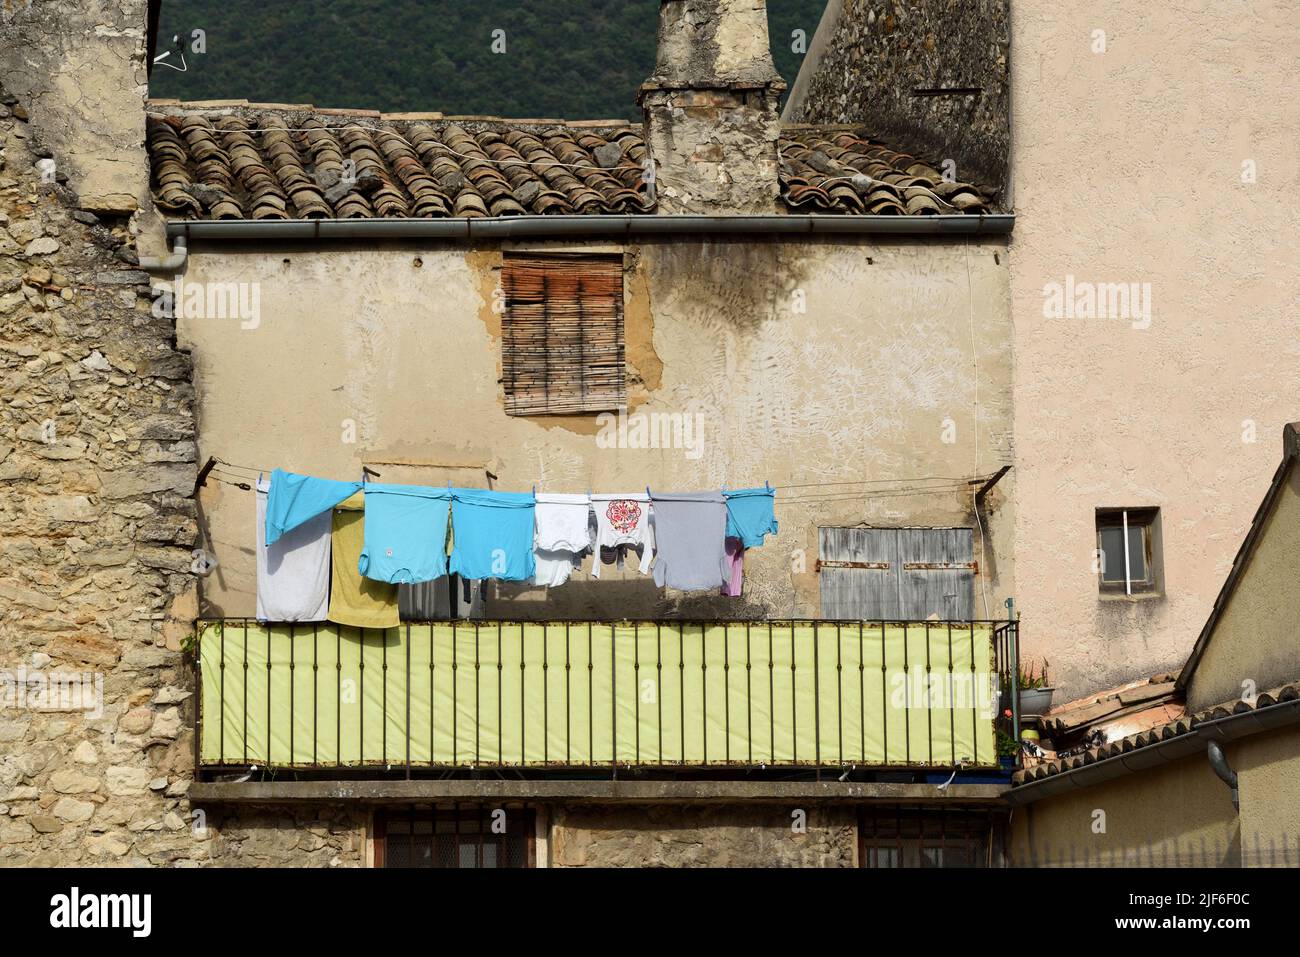 Laundry or Washing Drying on Washing Line or Clothes Line on Balcony in the Old Town Nyons Drôme Provence France Stock Photo